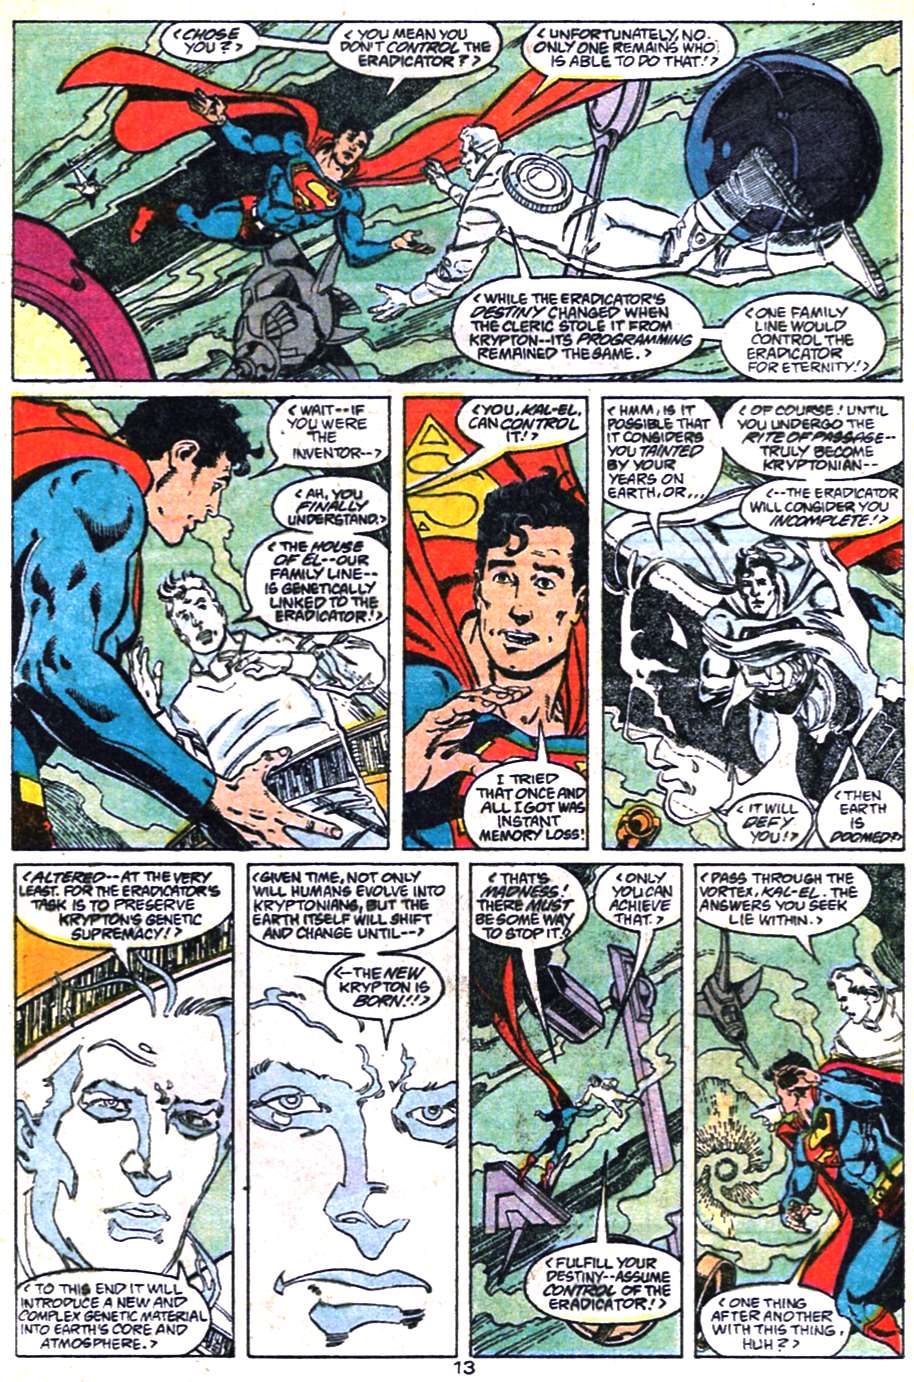 Adventures of Superman (1987) 461 Page 13